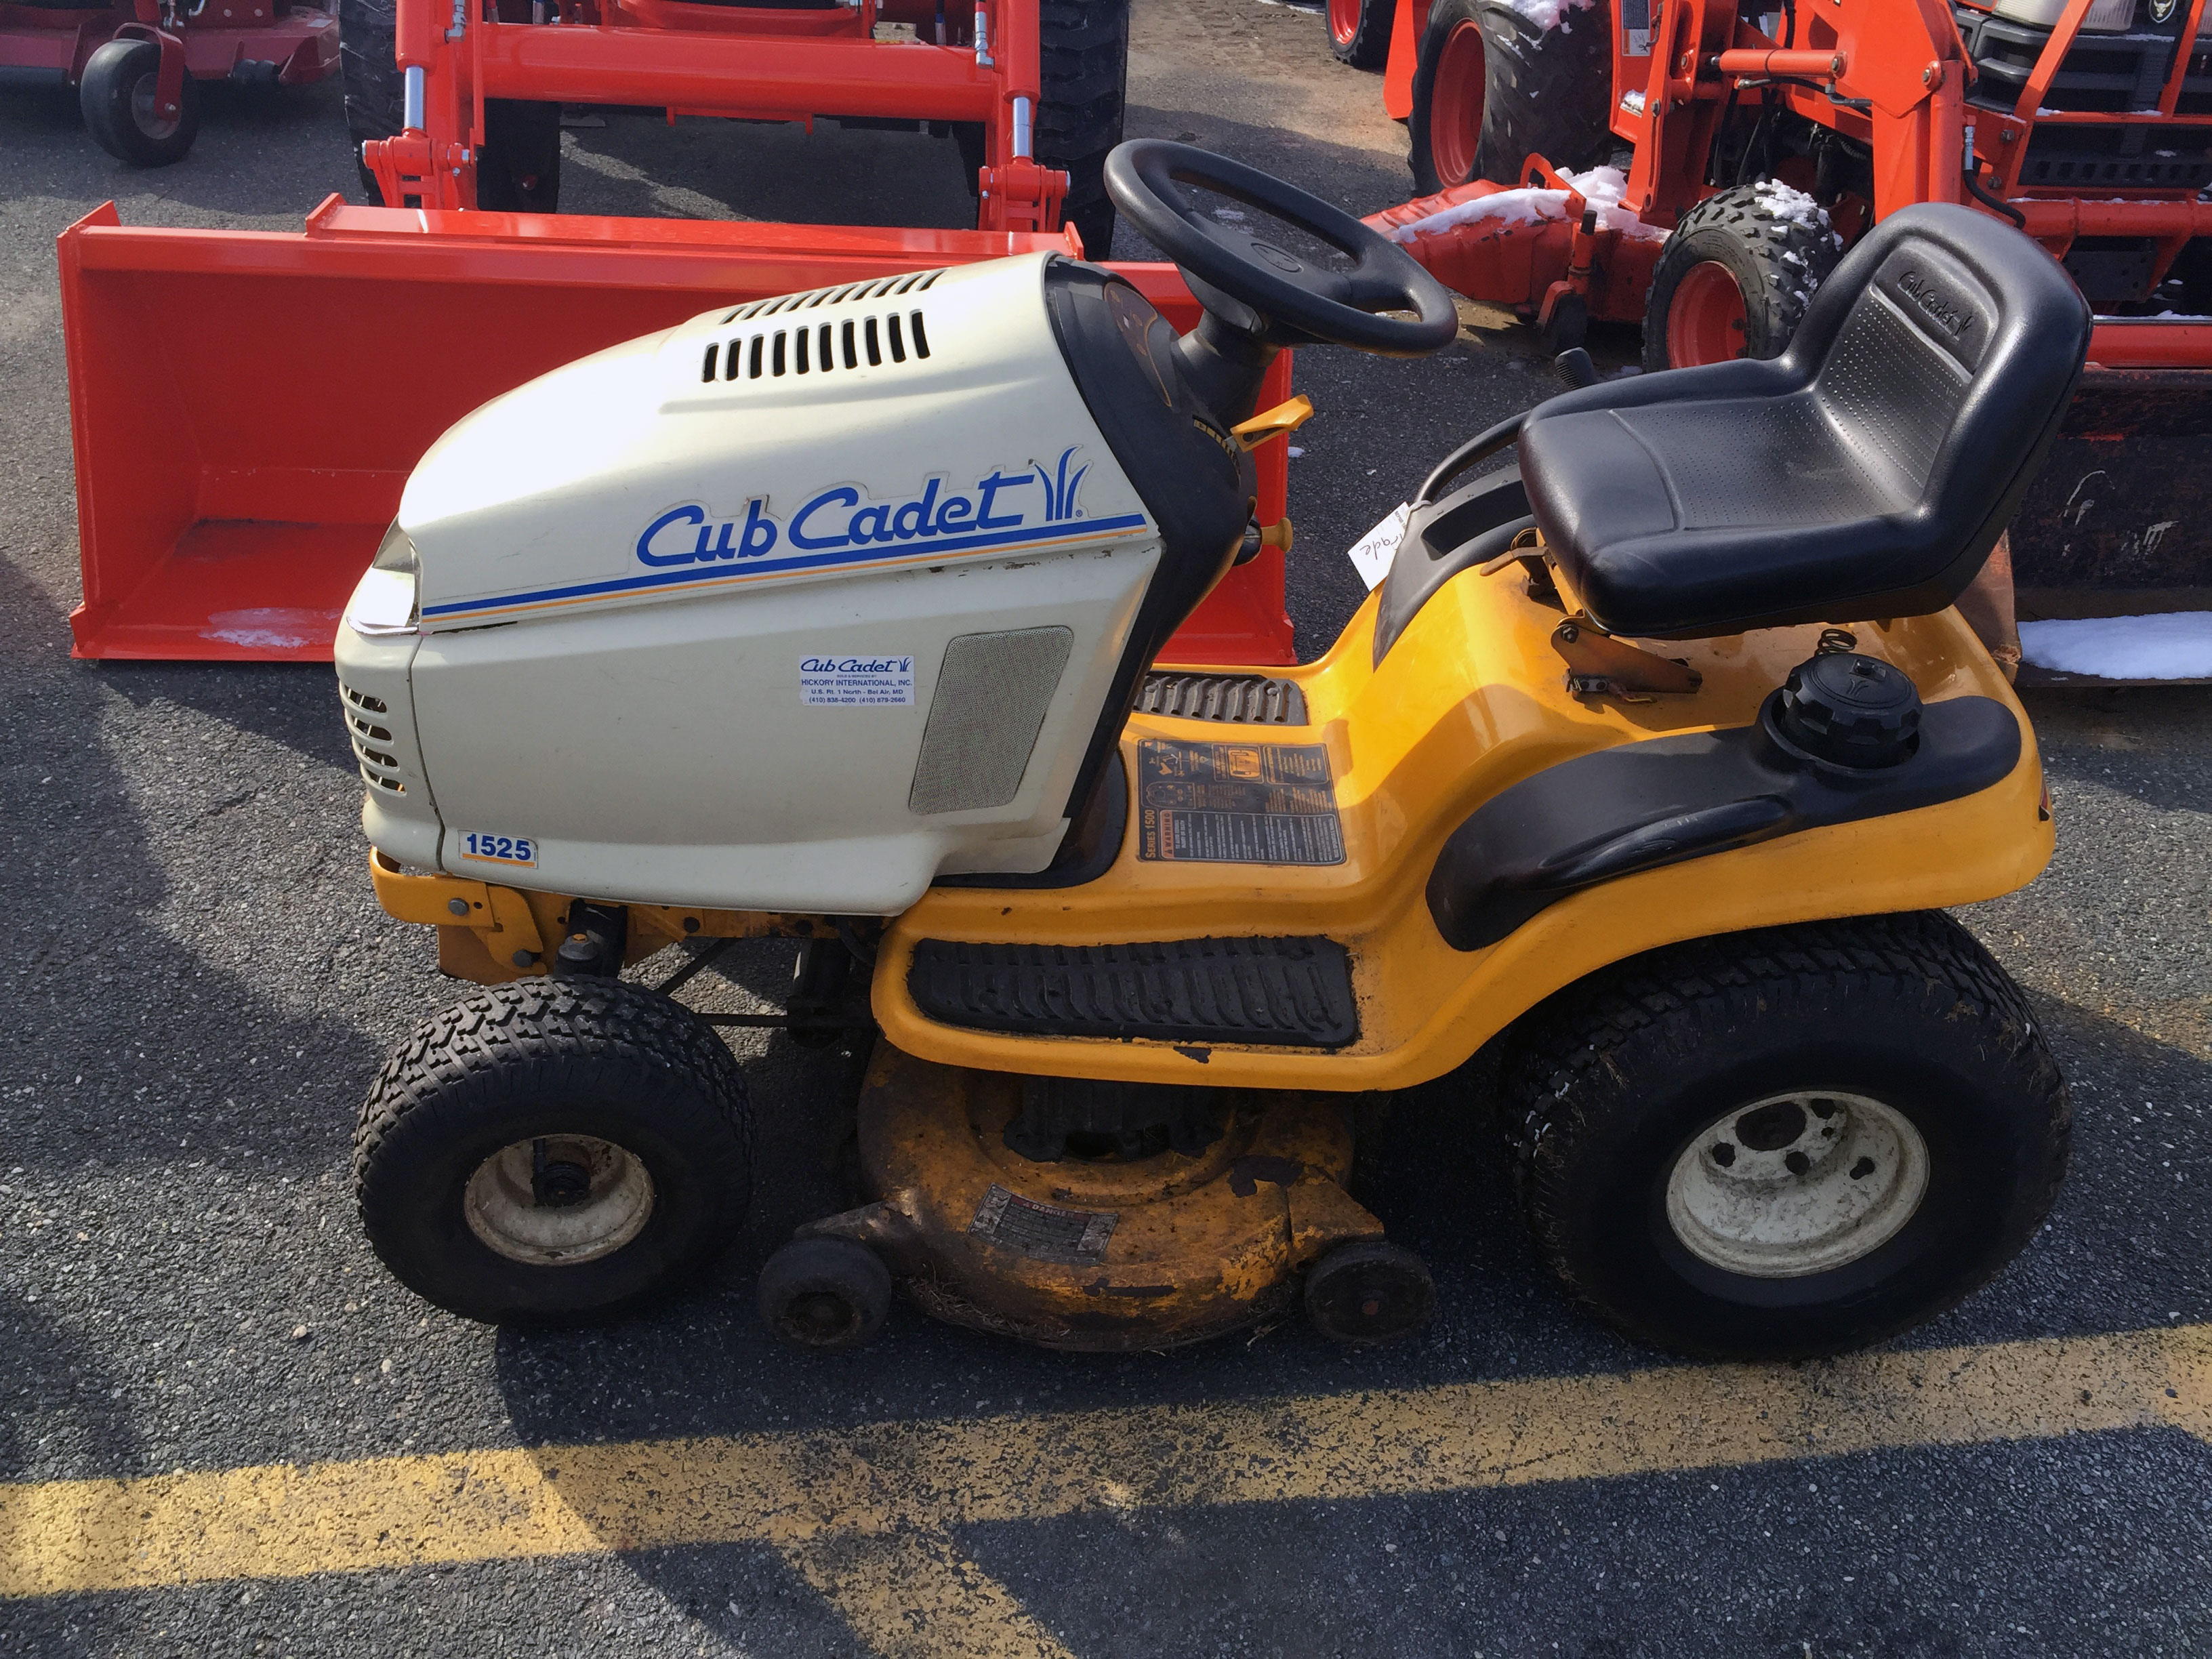 Used 2003 Cub Cadet 1525 For Sale in Harford County